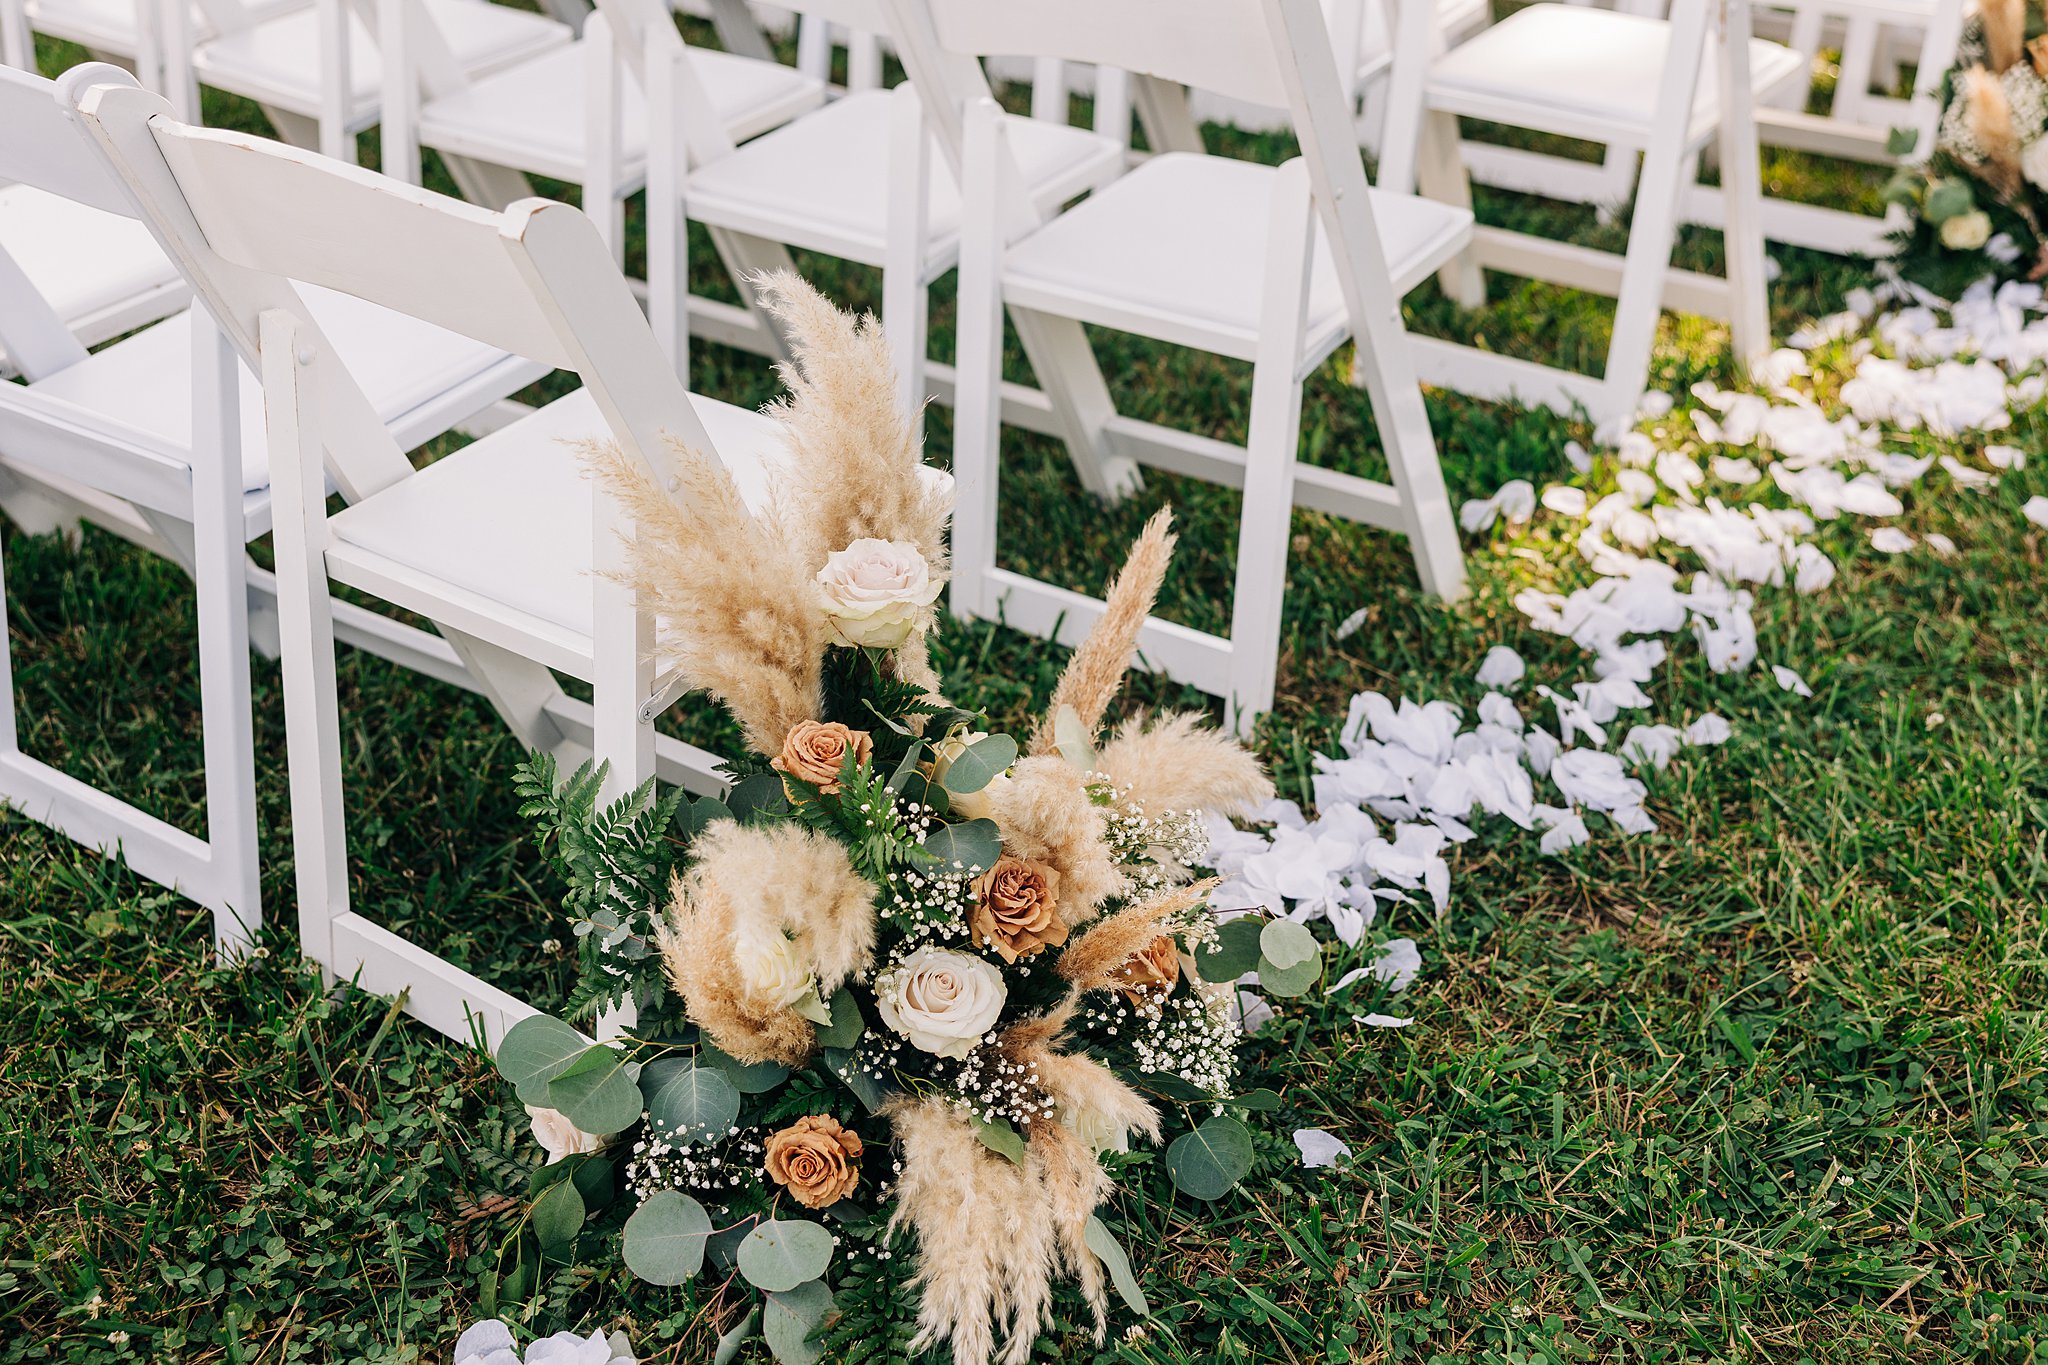 Details of a bouquet of flowers decorating the aisle of an outdoor wedding ceremony